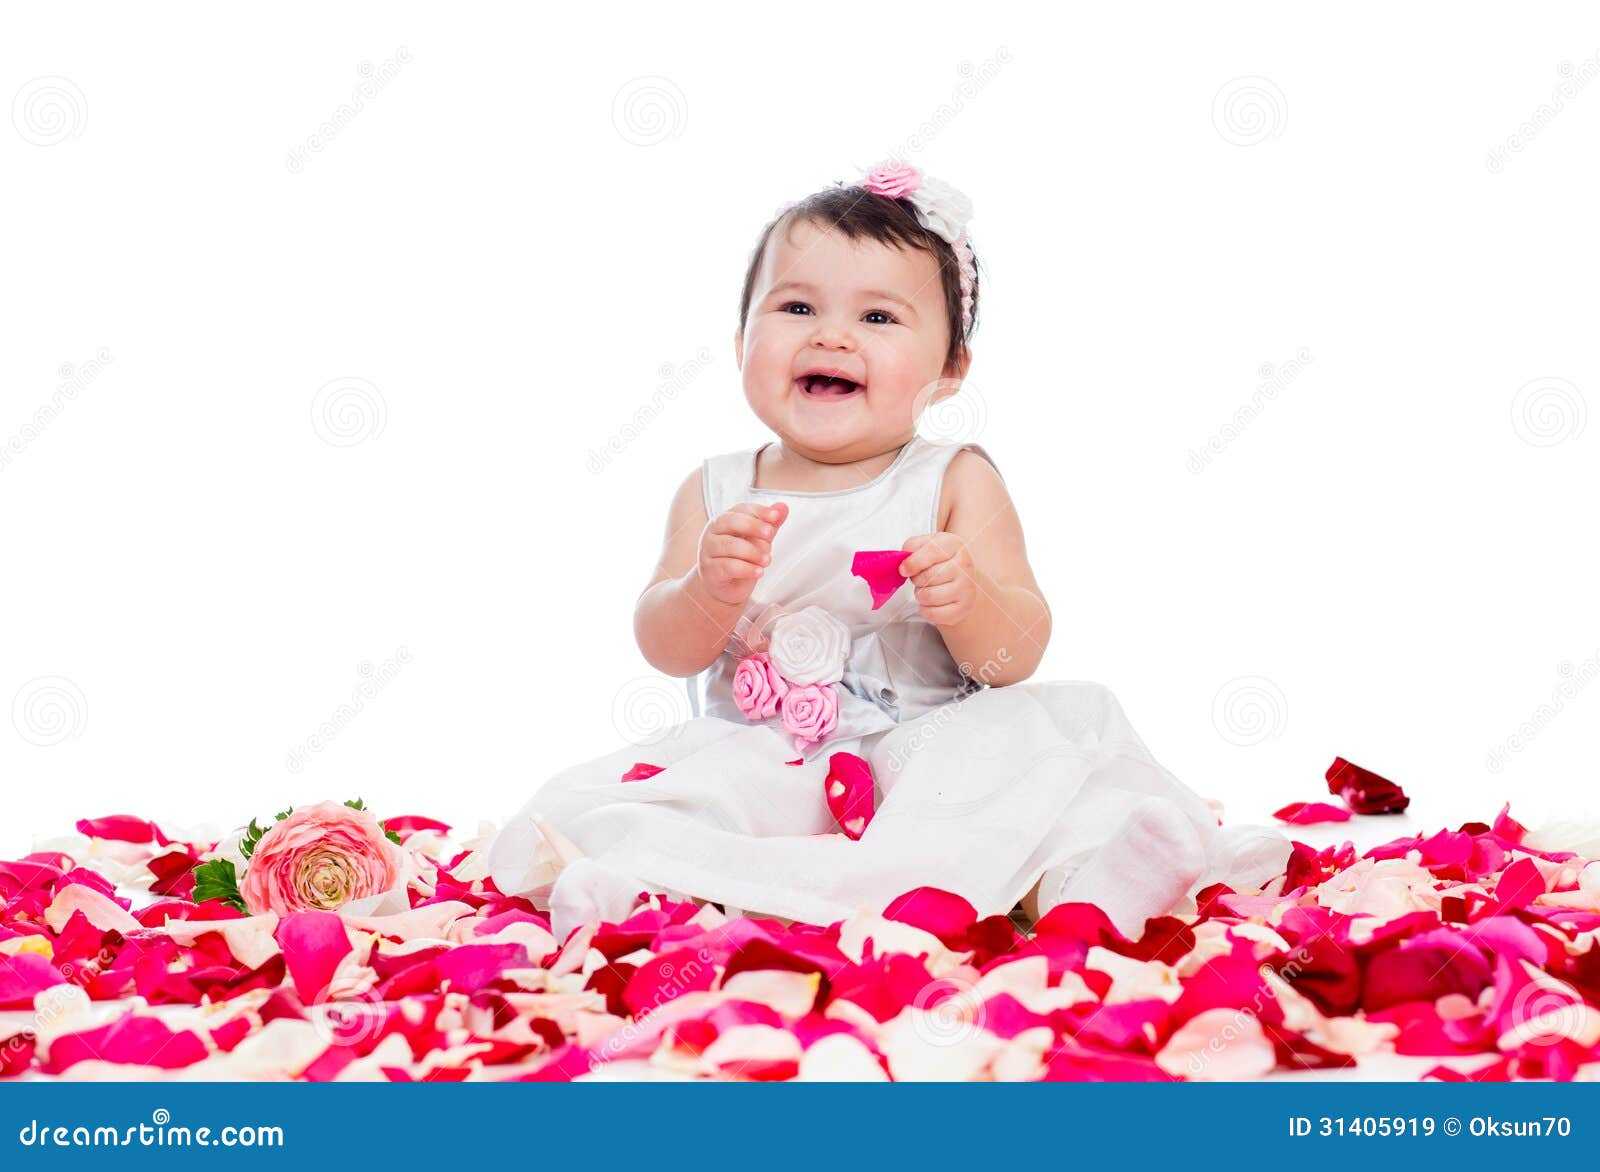 Happy Baby Girl Among Rose Petals Stock Image - Image of infant ...